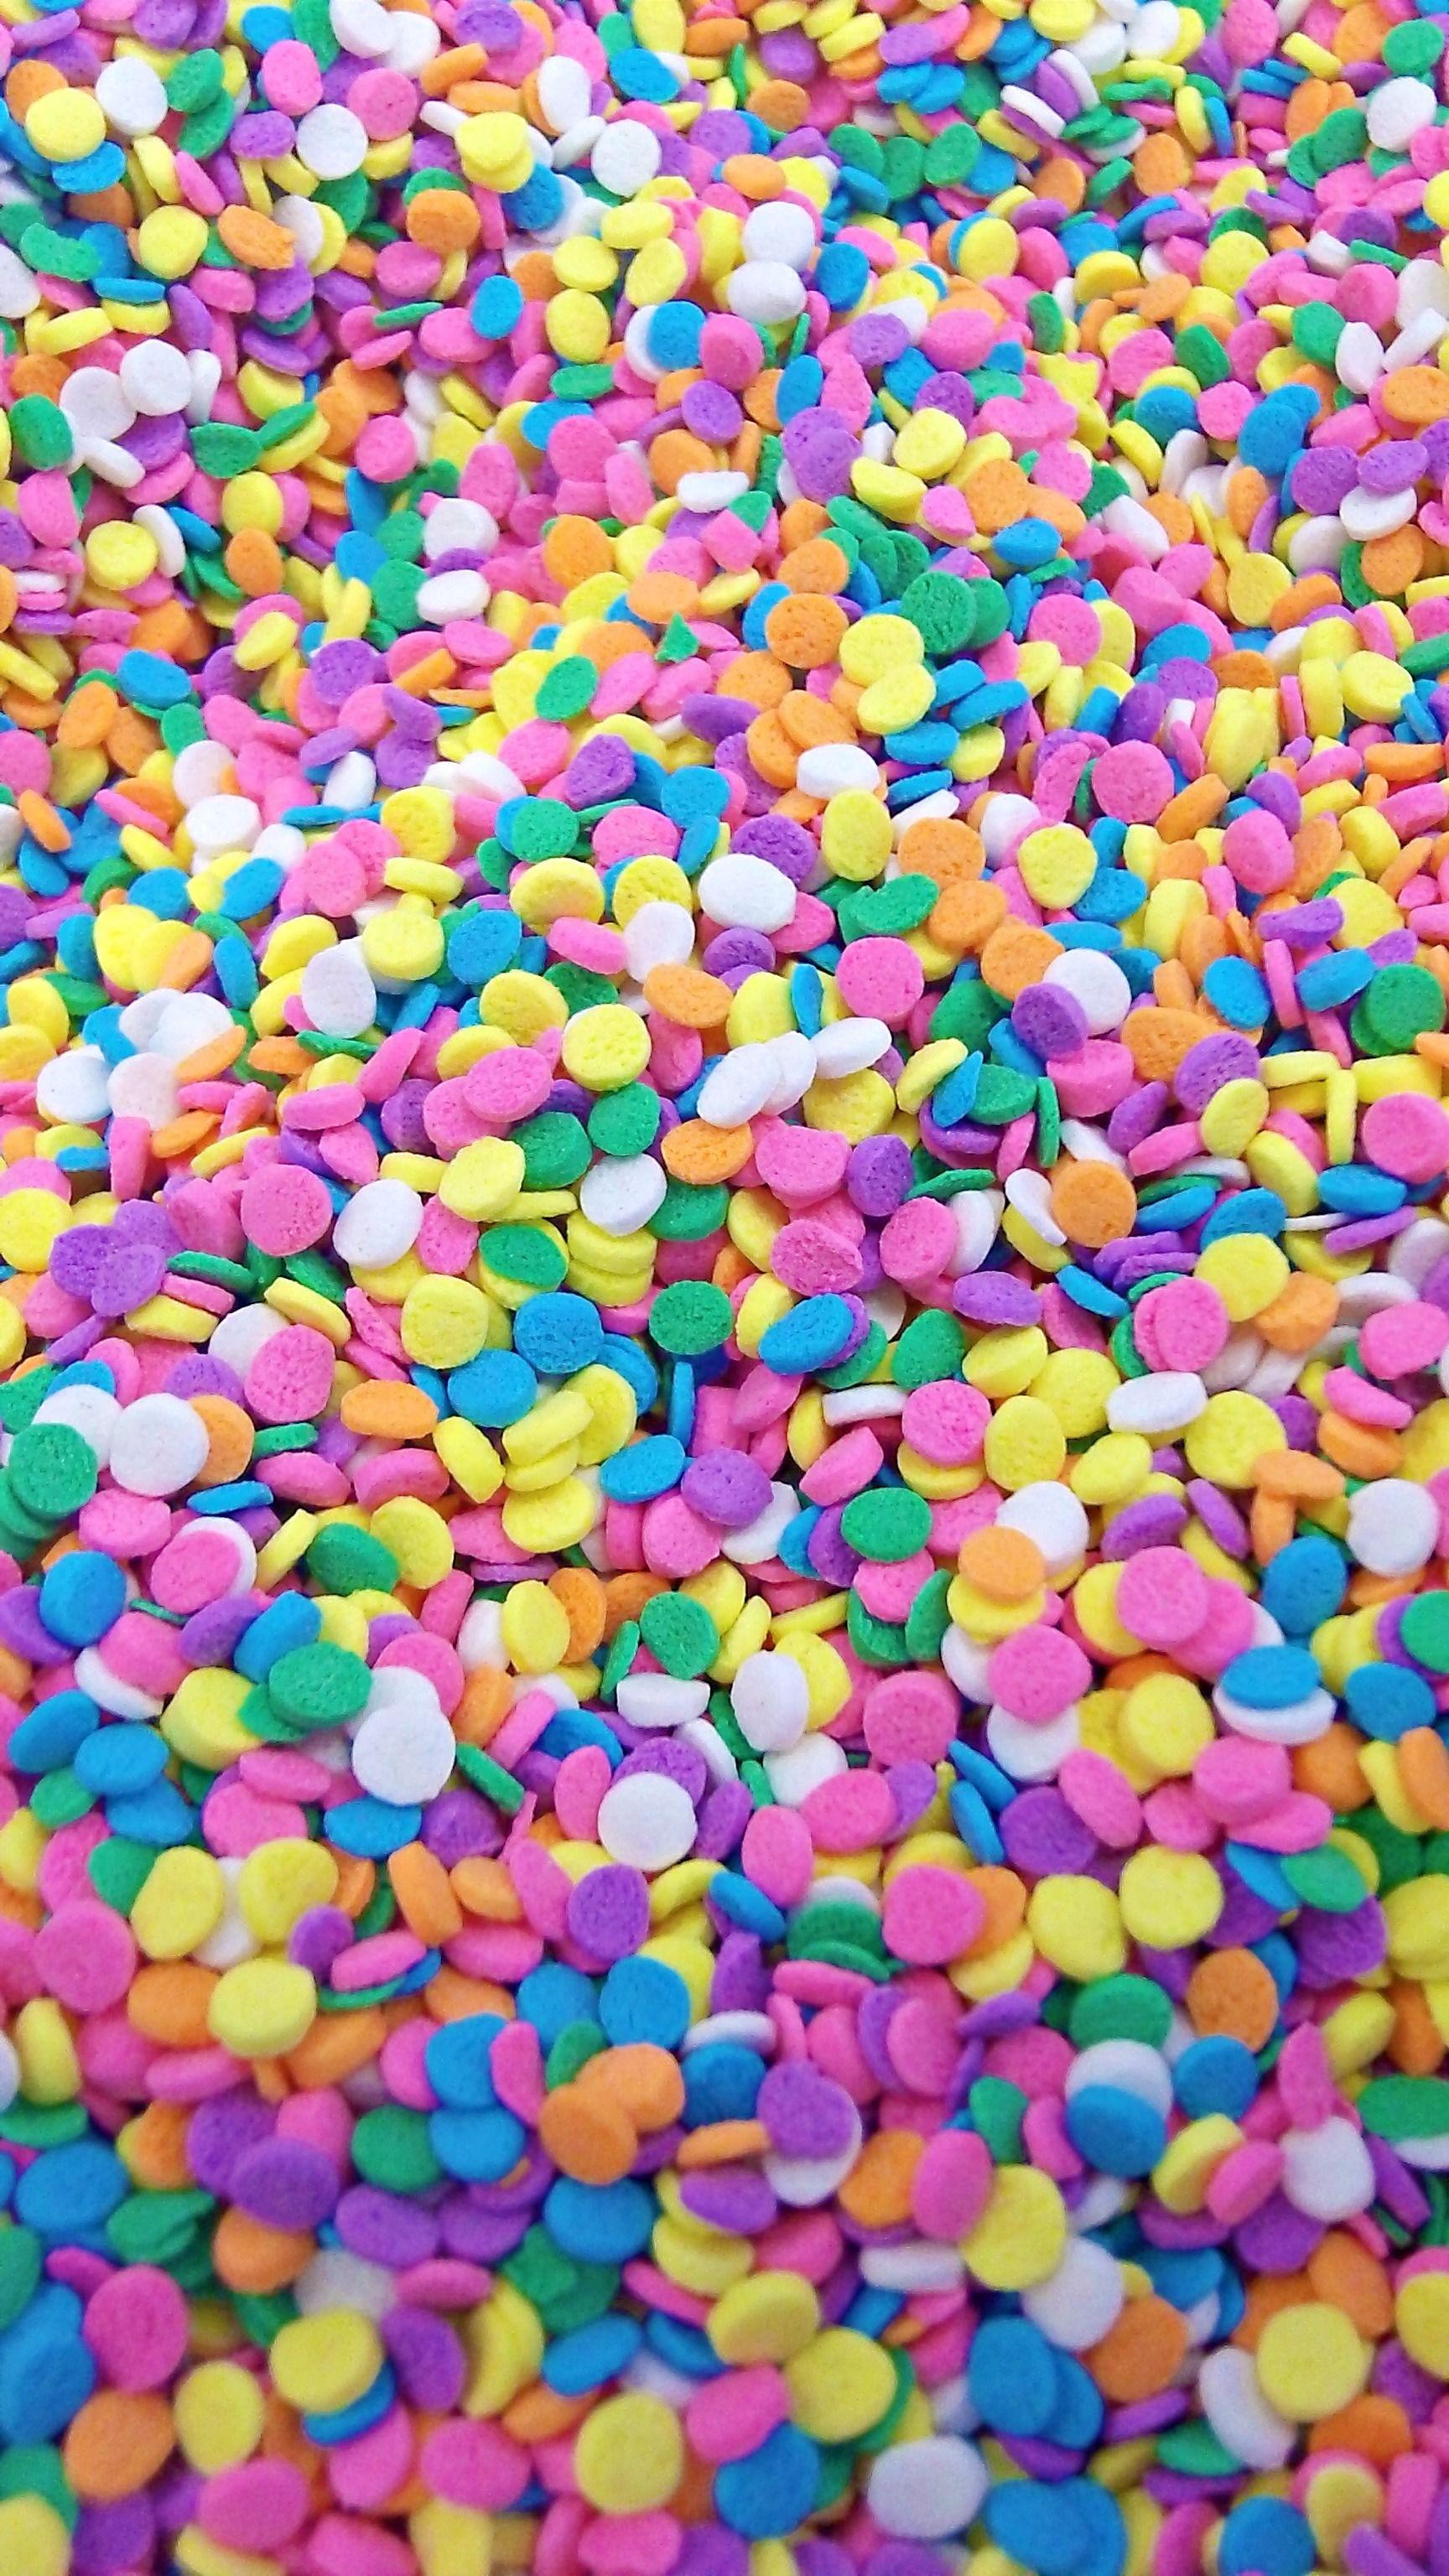 Pastel Confetti Sprinkles to add to your New Year's confections